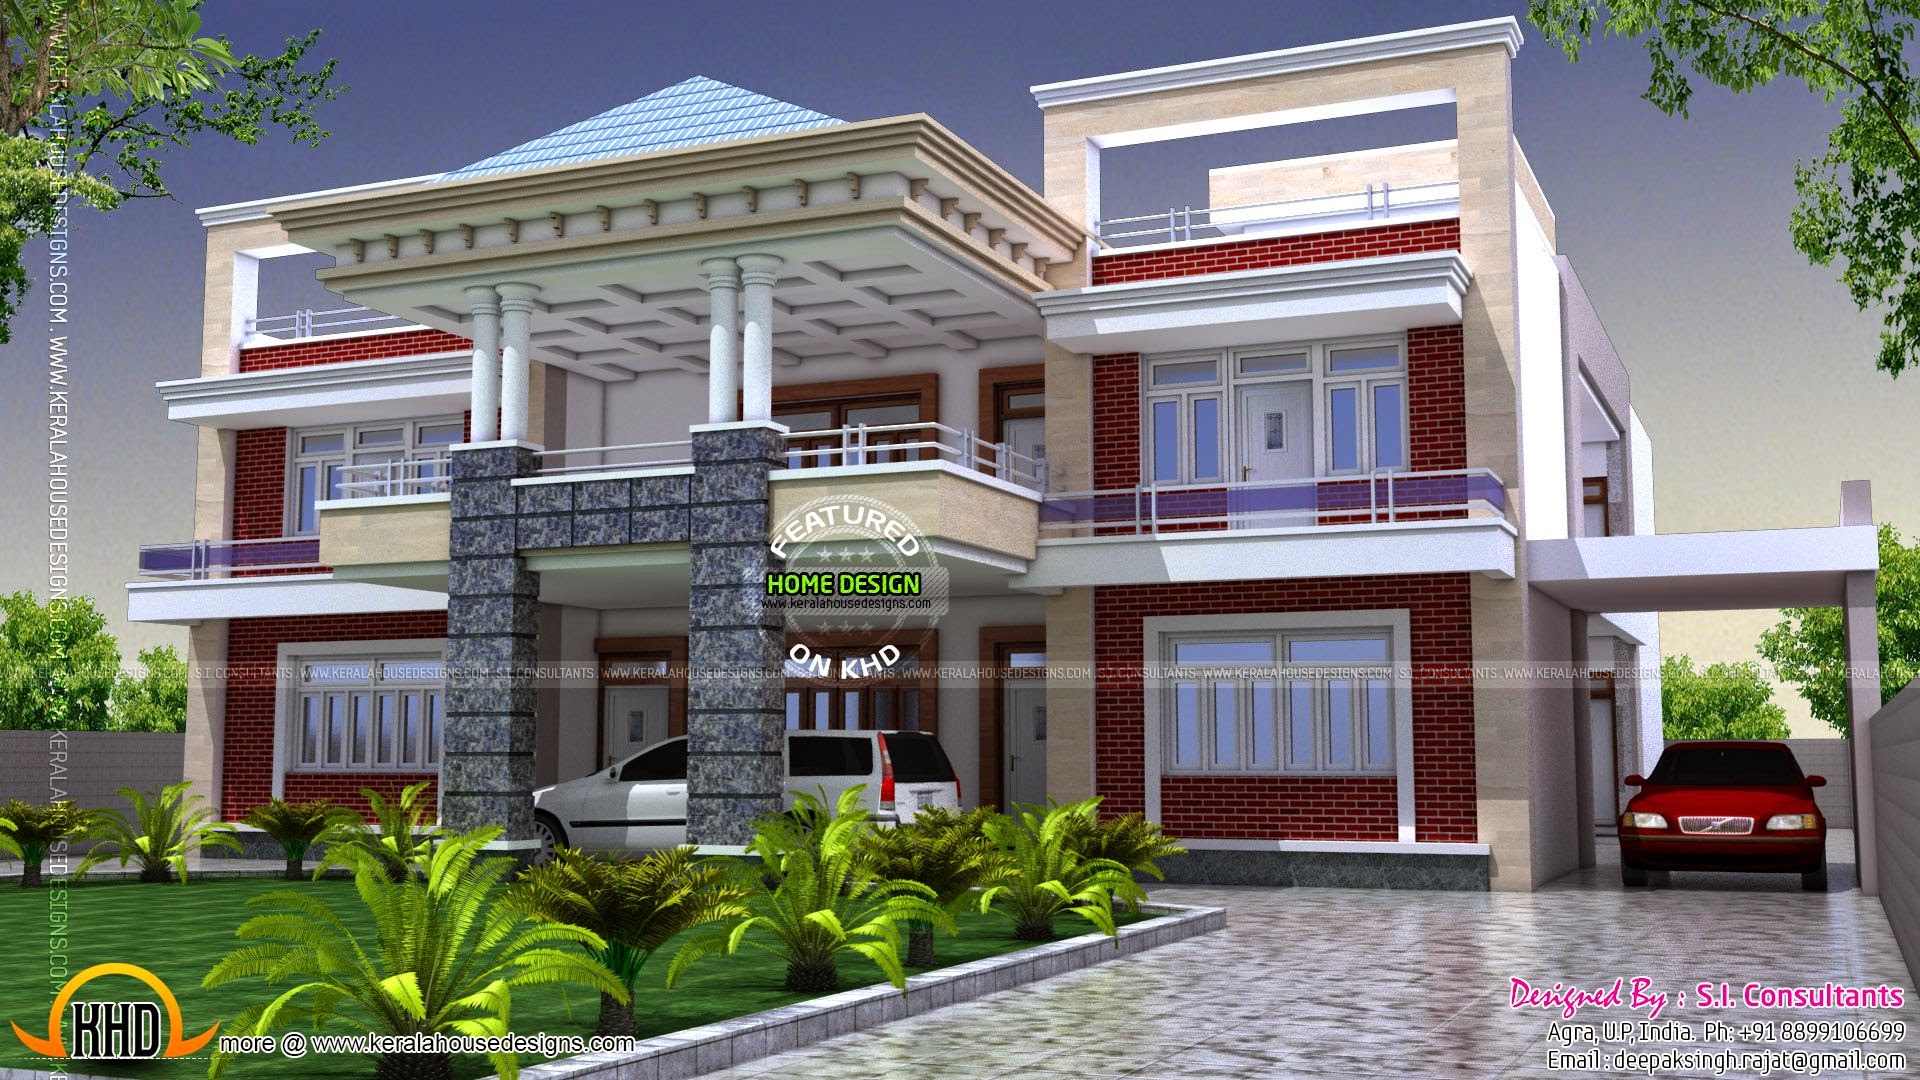  North  Indian  luxury house  Kerala home  design and floor plans 